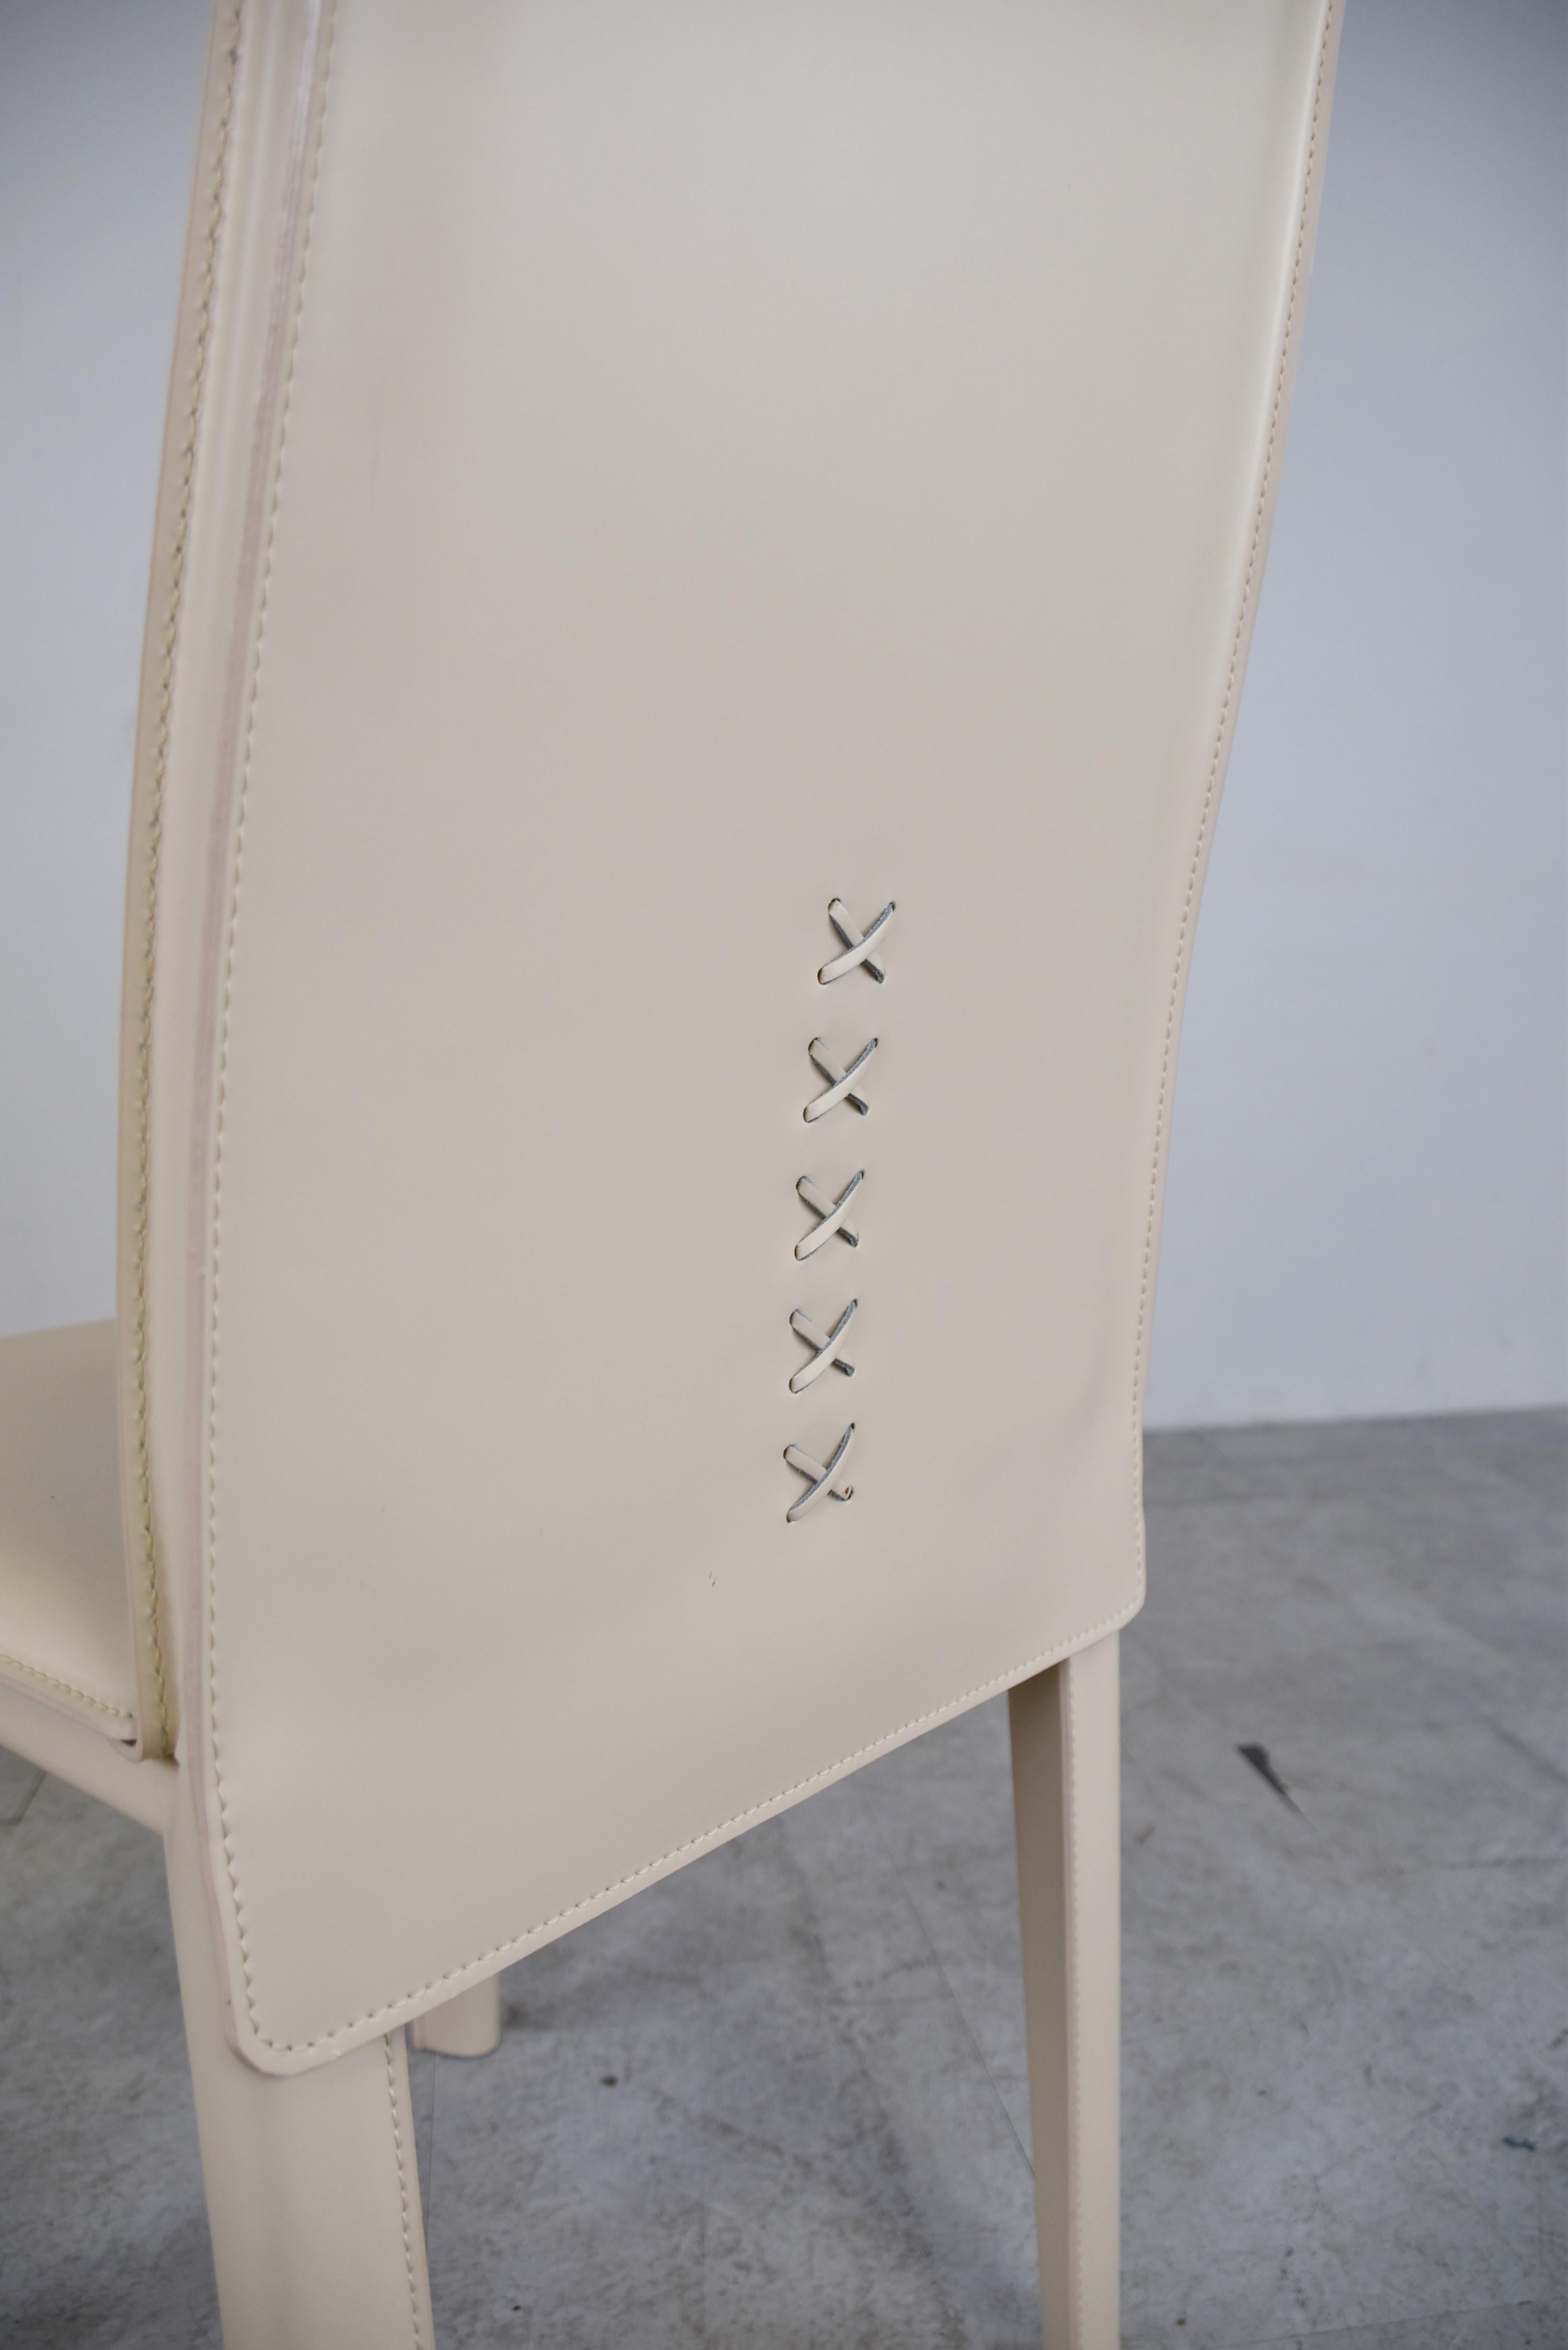 Vintage white leather dining chairs by Arper Italy.

High quality and sturdy stiched leather dining chairs with a timeless design. 

These are the model with the higher backrests.

Cool stitched leather detail at the back of the